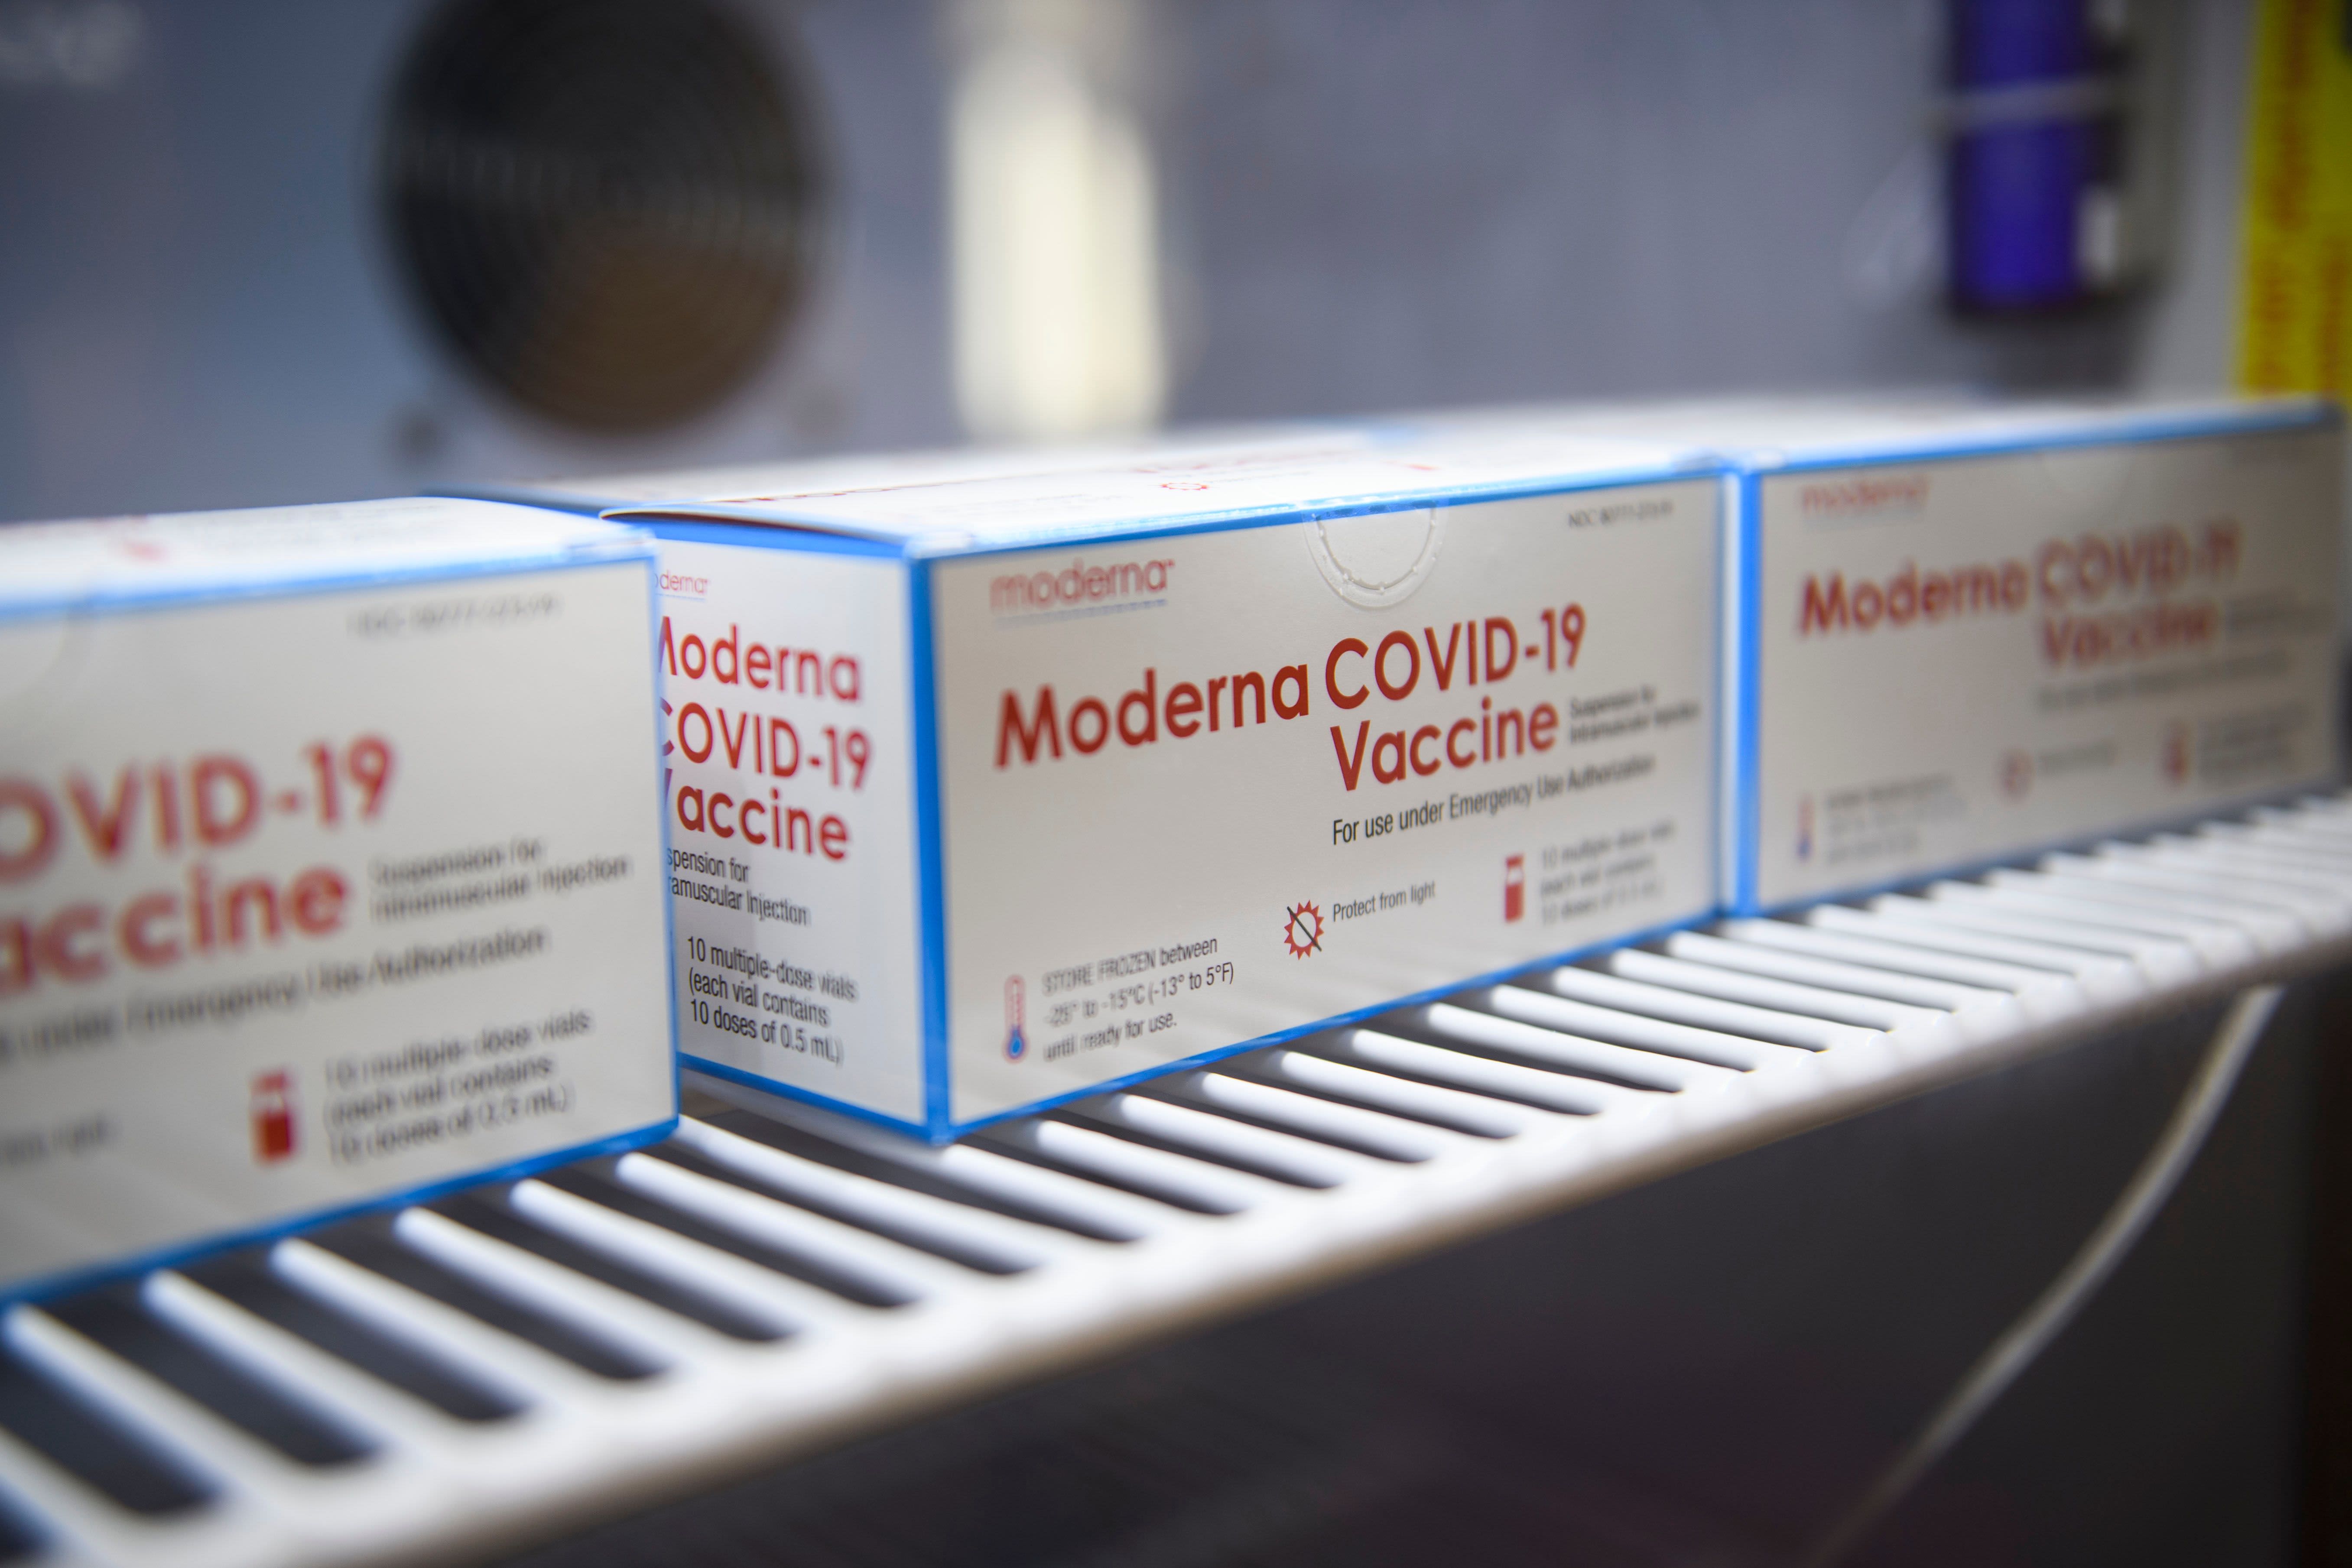 Moderna Covid vaccine can remain stable at refrigerated temperatures for 3 months, company says - CNBC